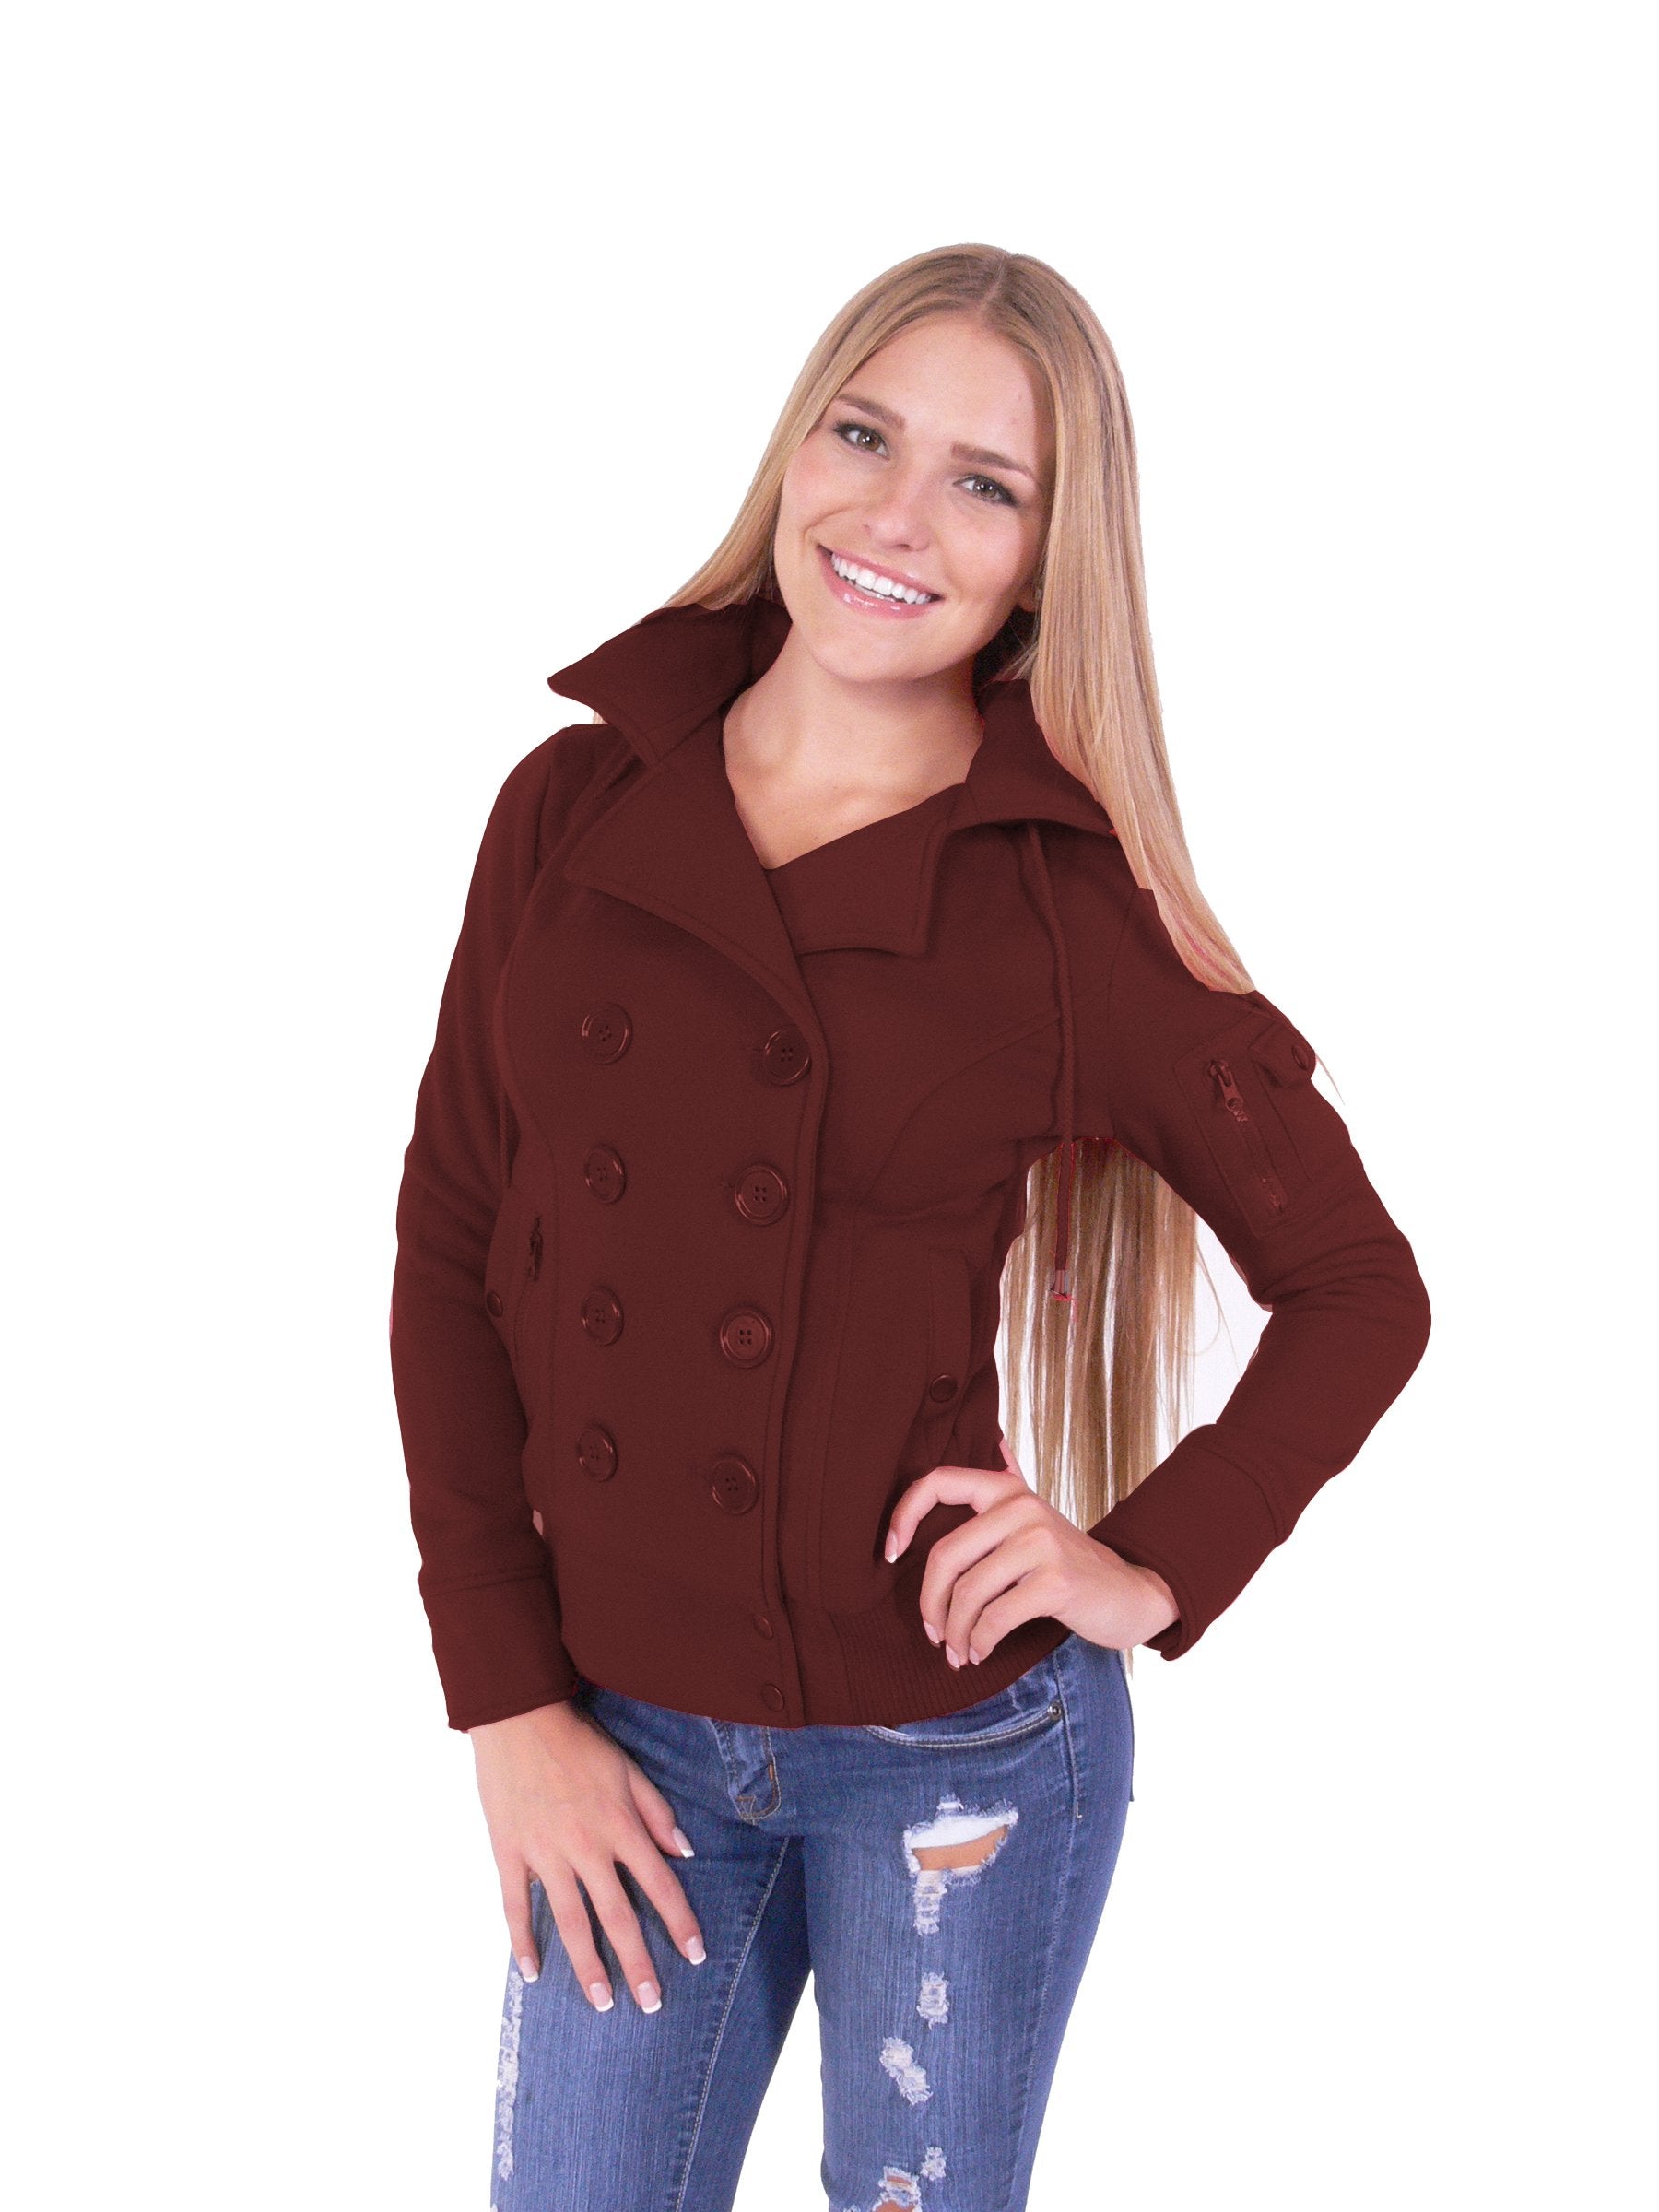 Fleece Double Breast Bomber Coat with Hoodie Jacket Four Buttons Style (M, Camel)